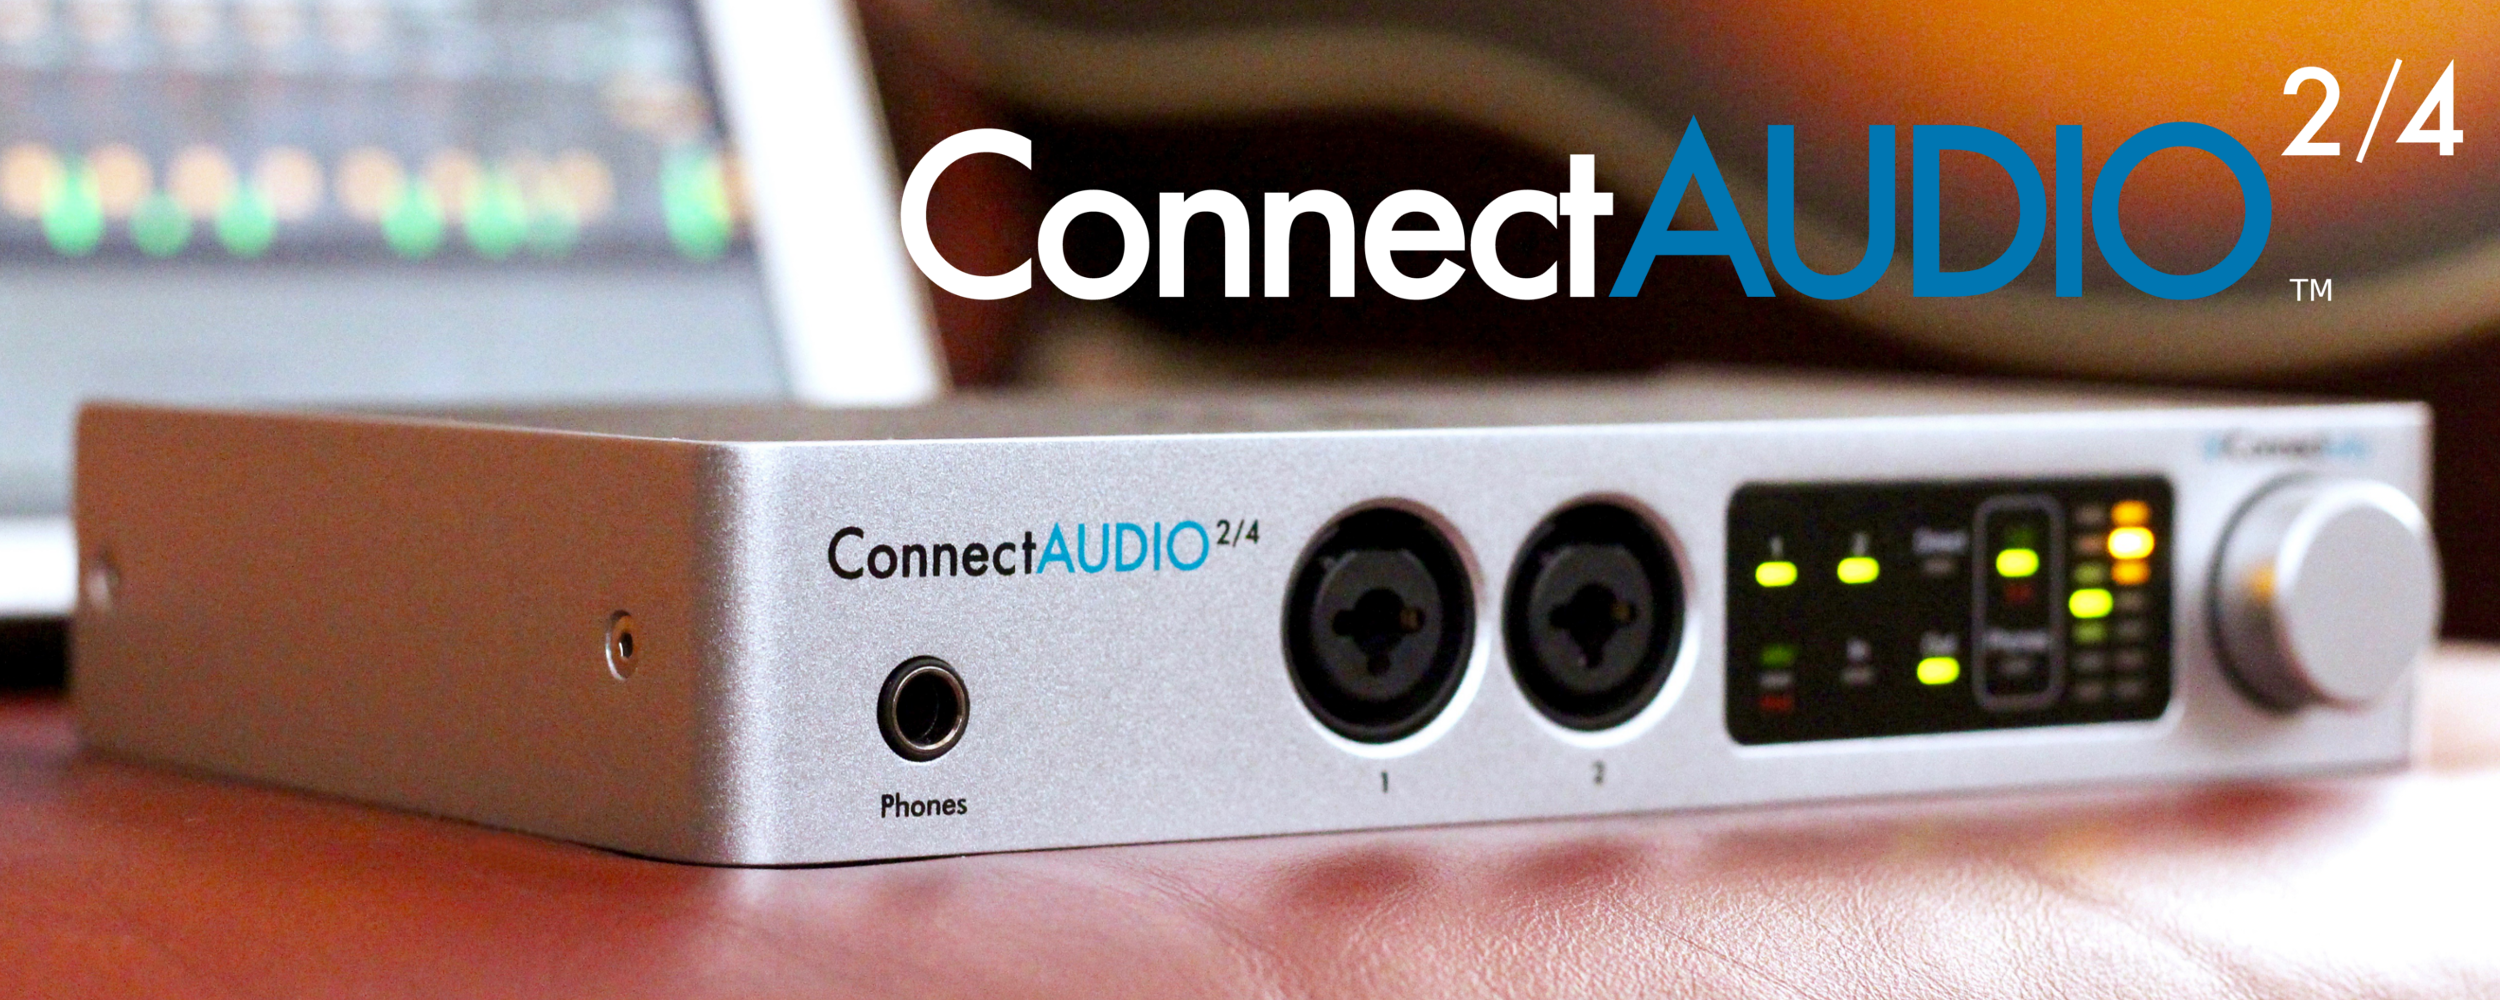 caudio-24 iConnectivity ConnectAUDIO2/4 Touch Controlled 2-Input 4-Output Audio & MIDI Interface